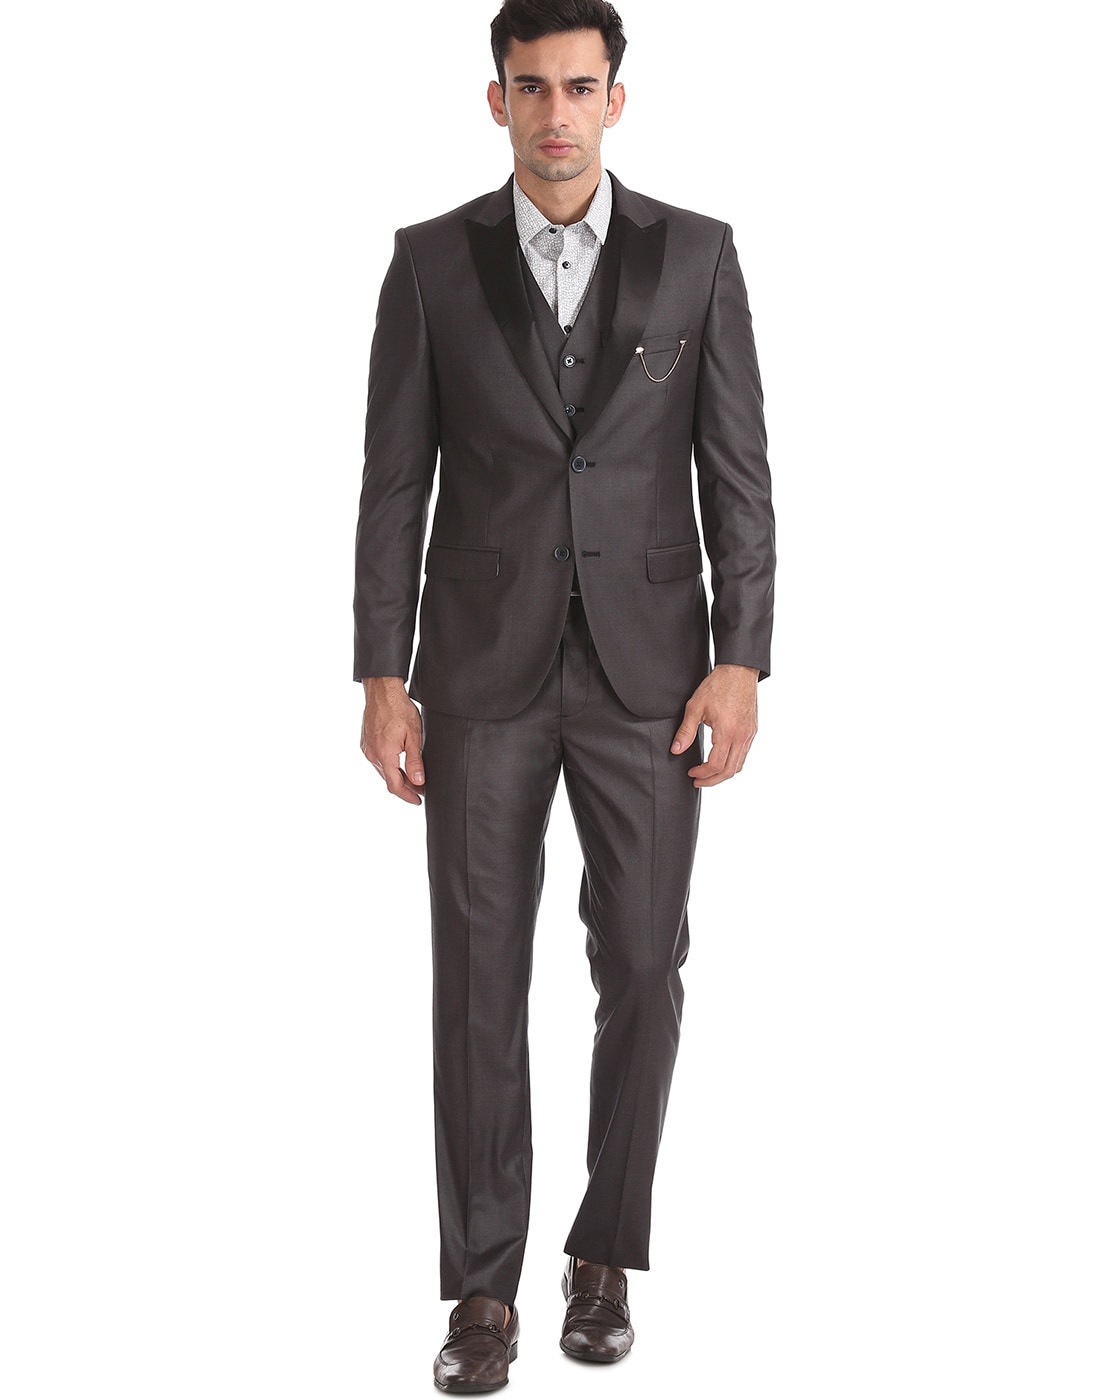 Blue Check Suit With Grey Waistcoat  Marc Darcy